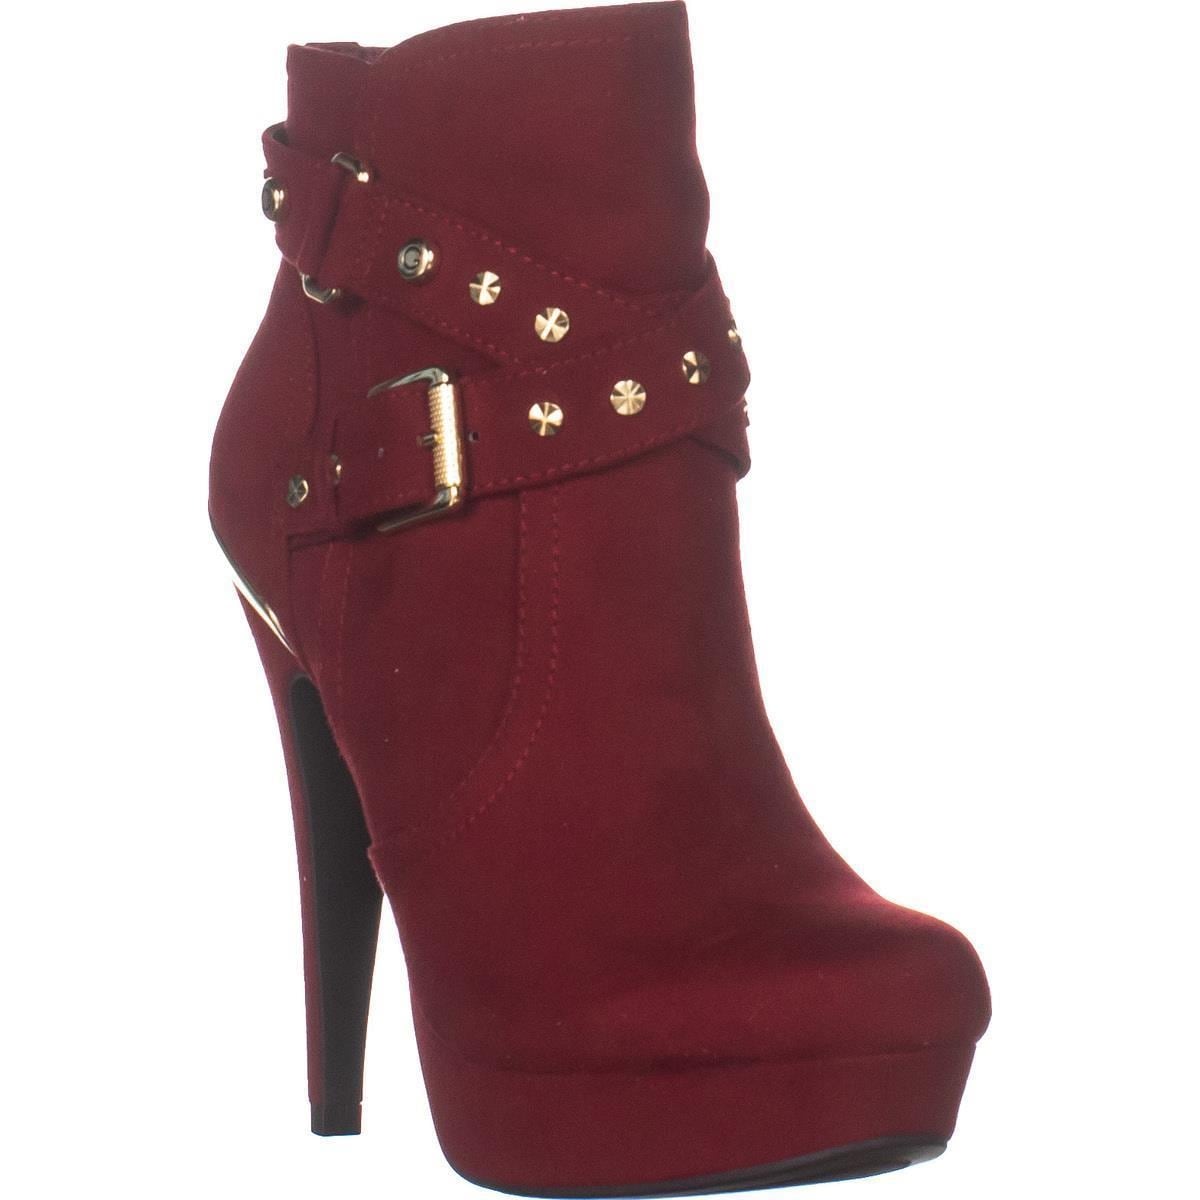 G by Guess Deeka Heeled Ankle Boots 